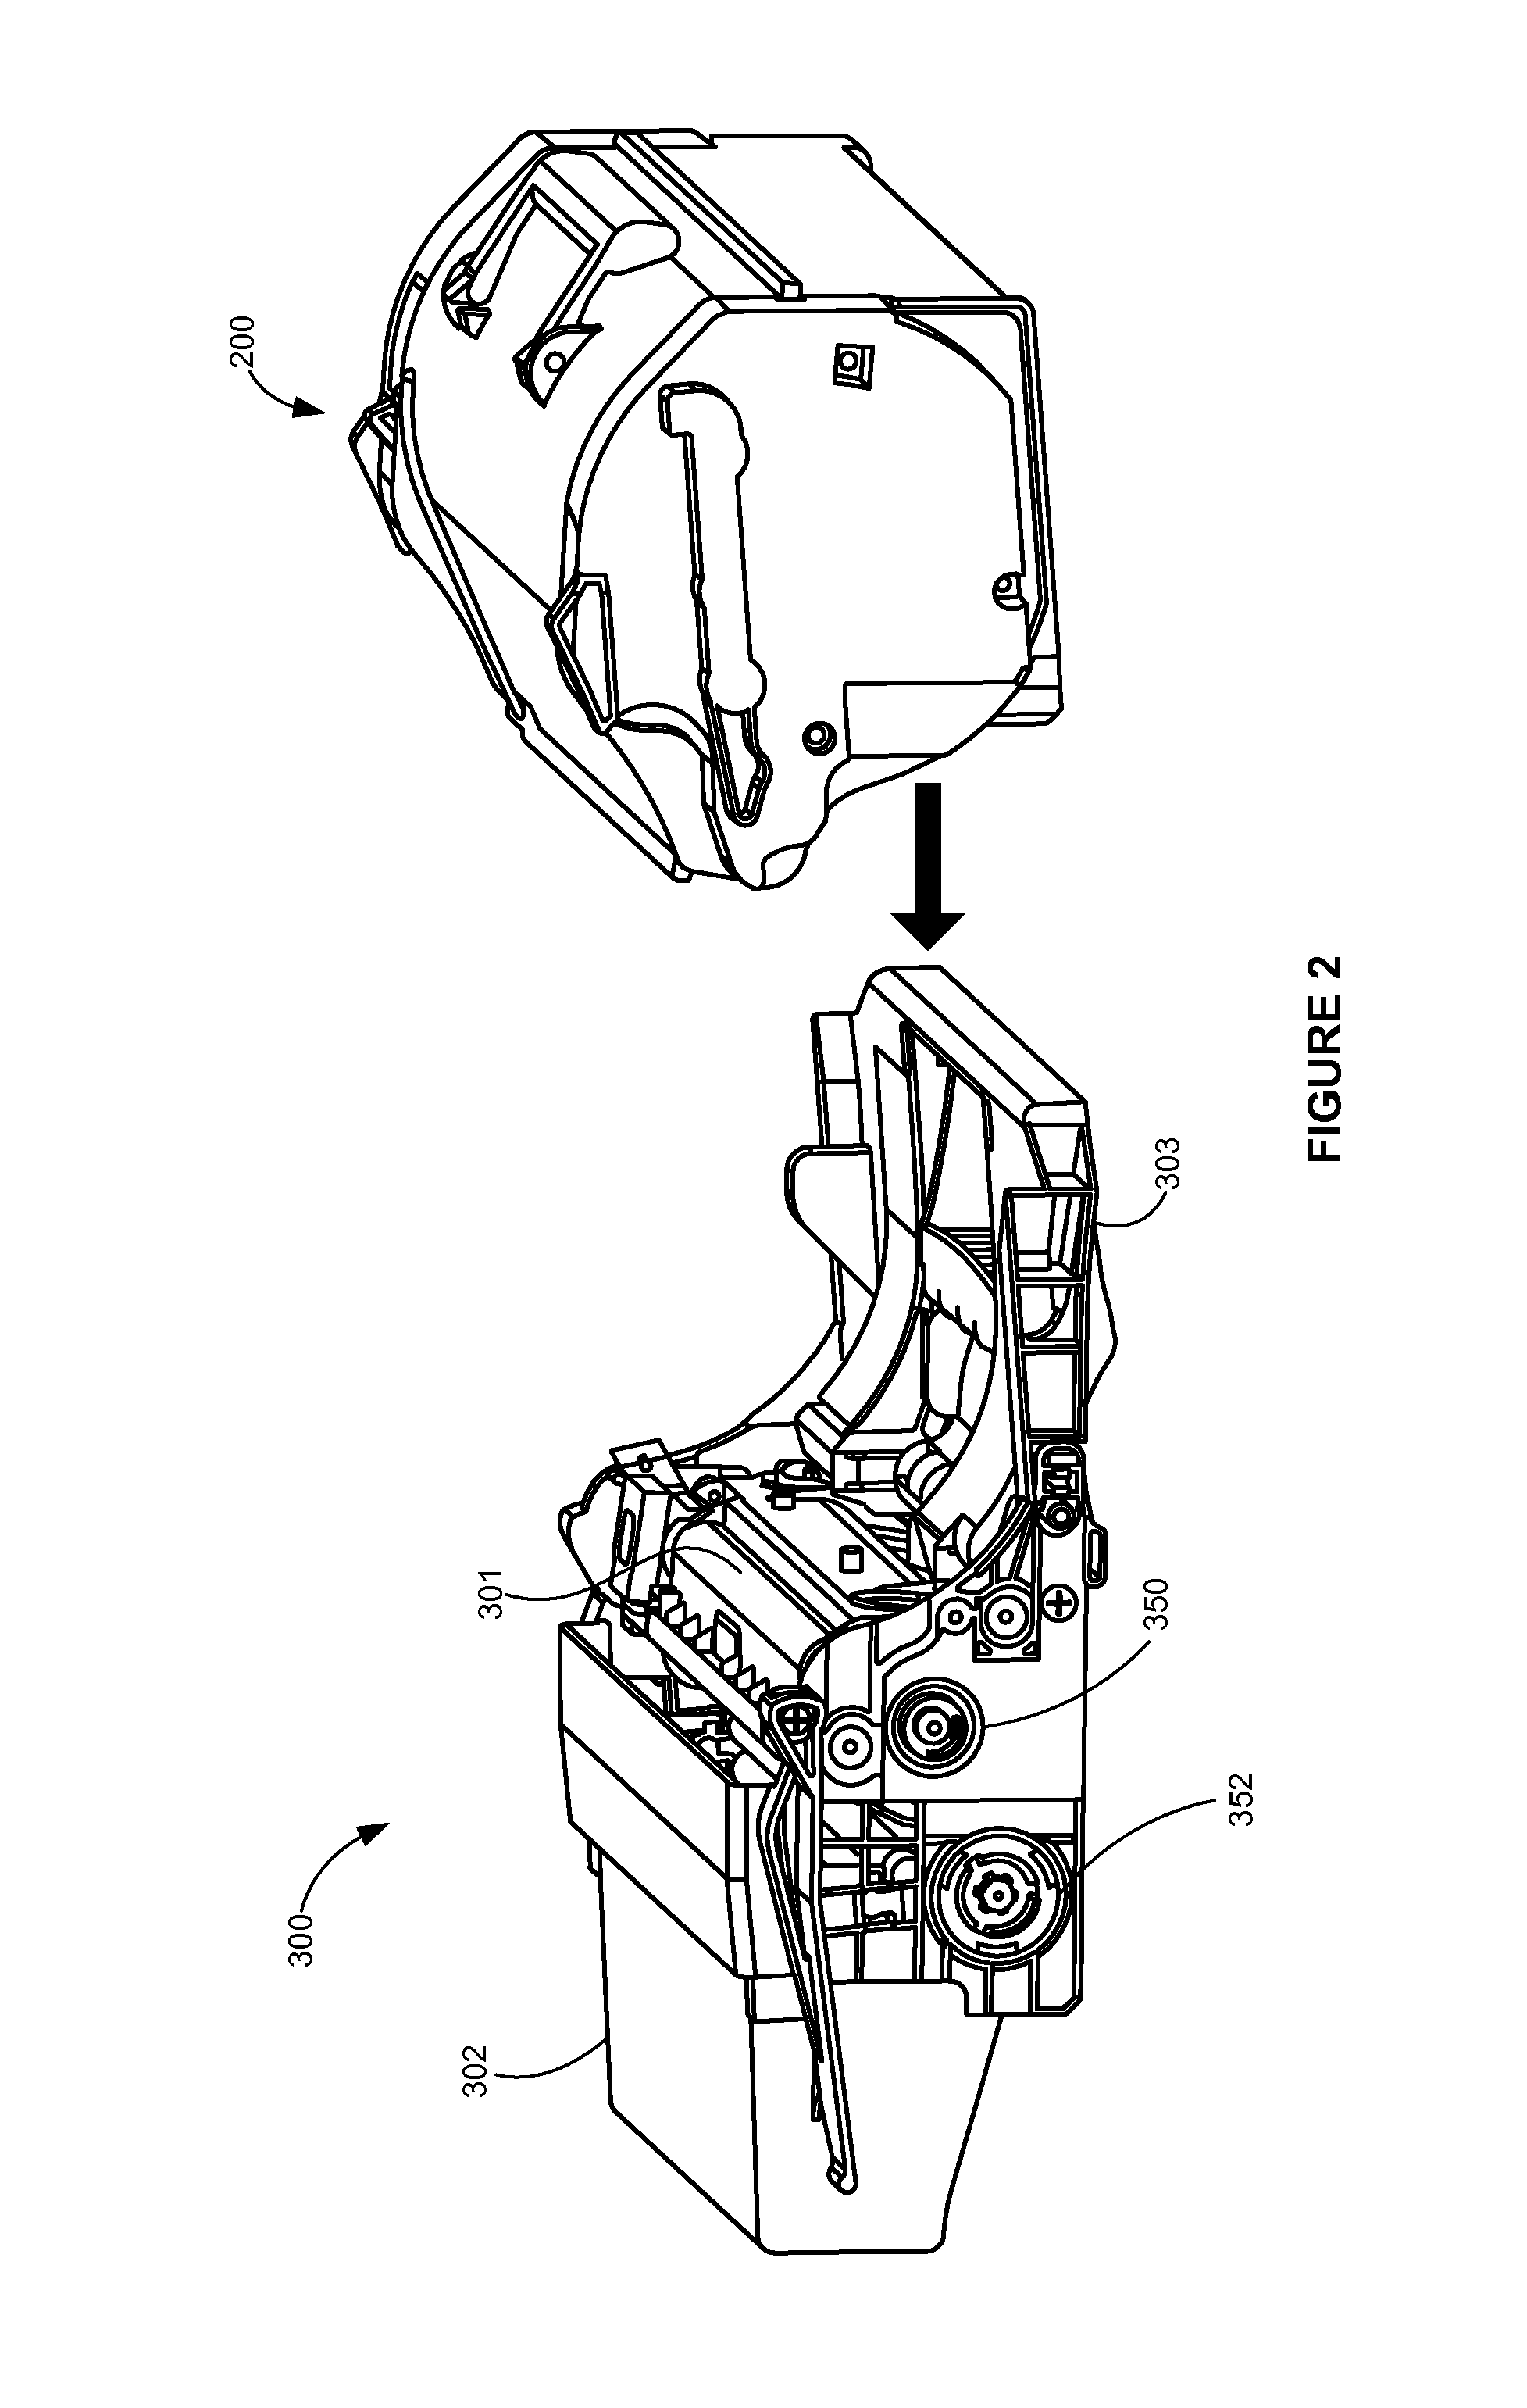 Methods for Providing a Page Countdown for a Replaceable Unit of an Image Forming Device